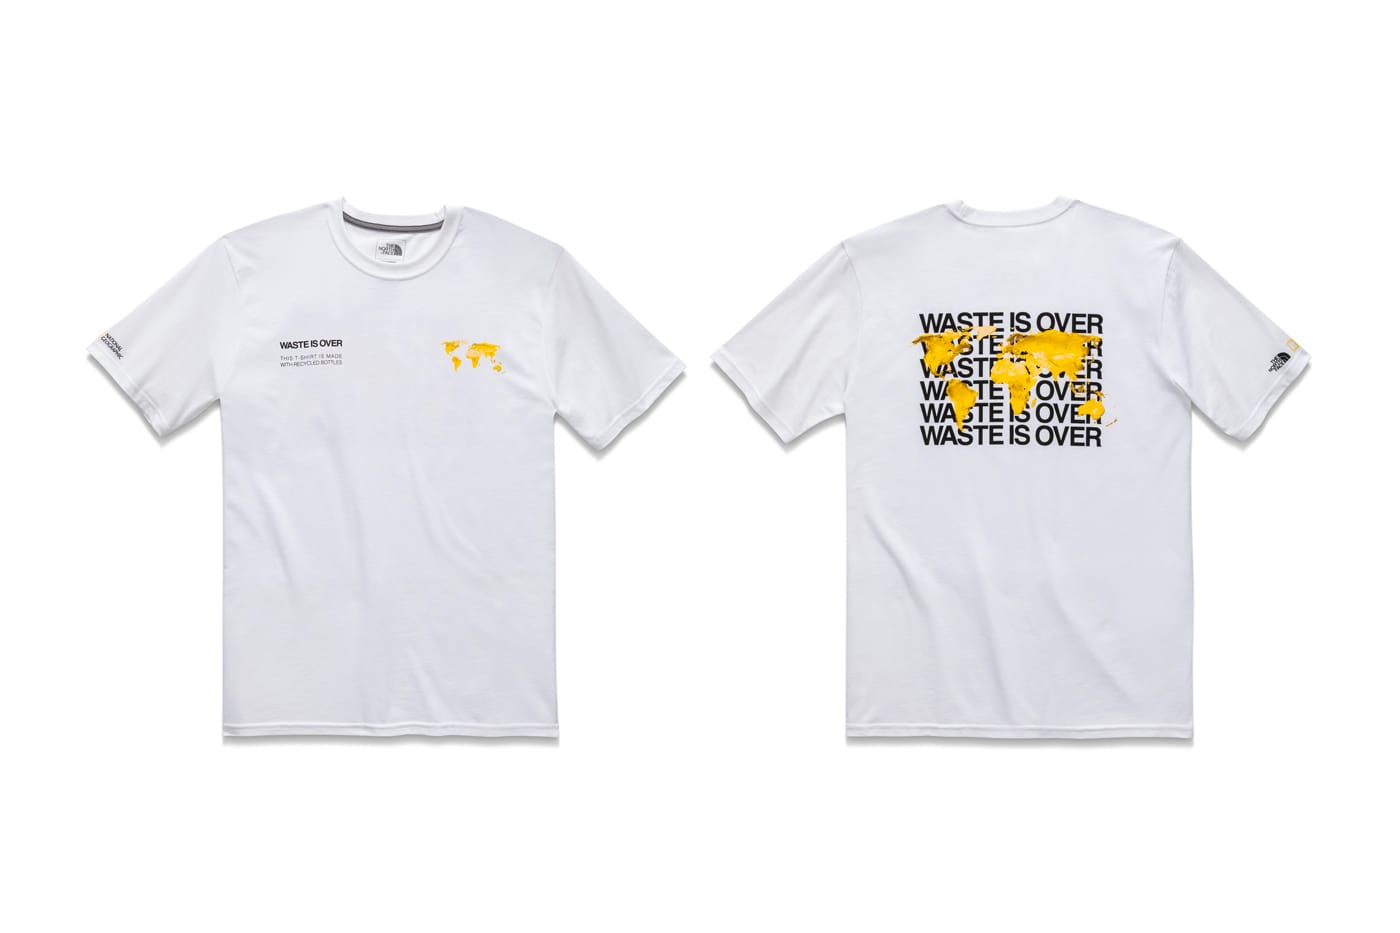 national geographic north face shirt